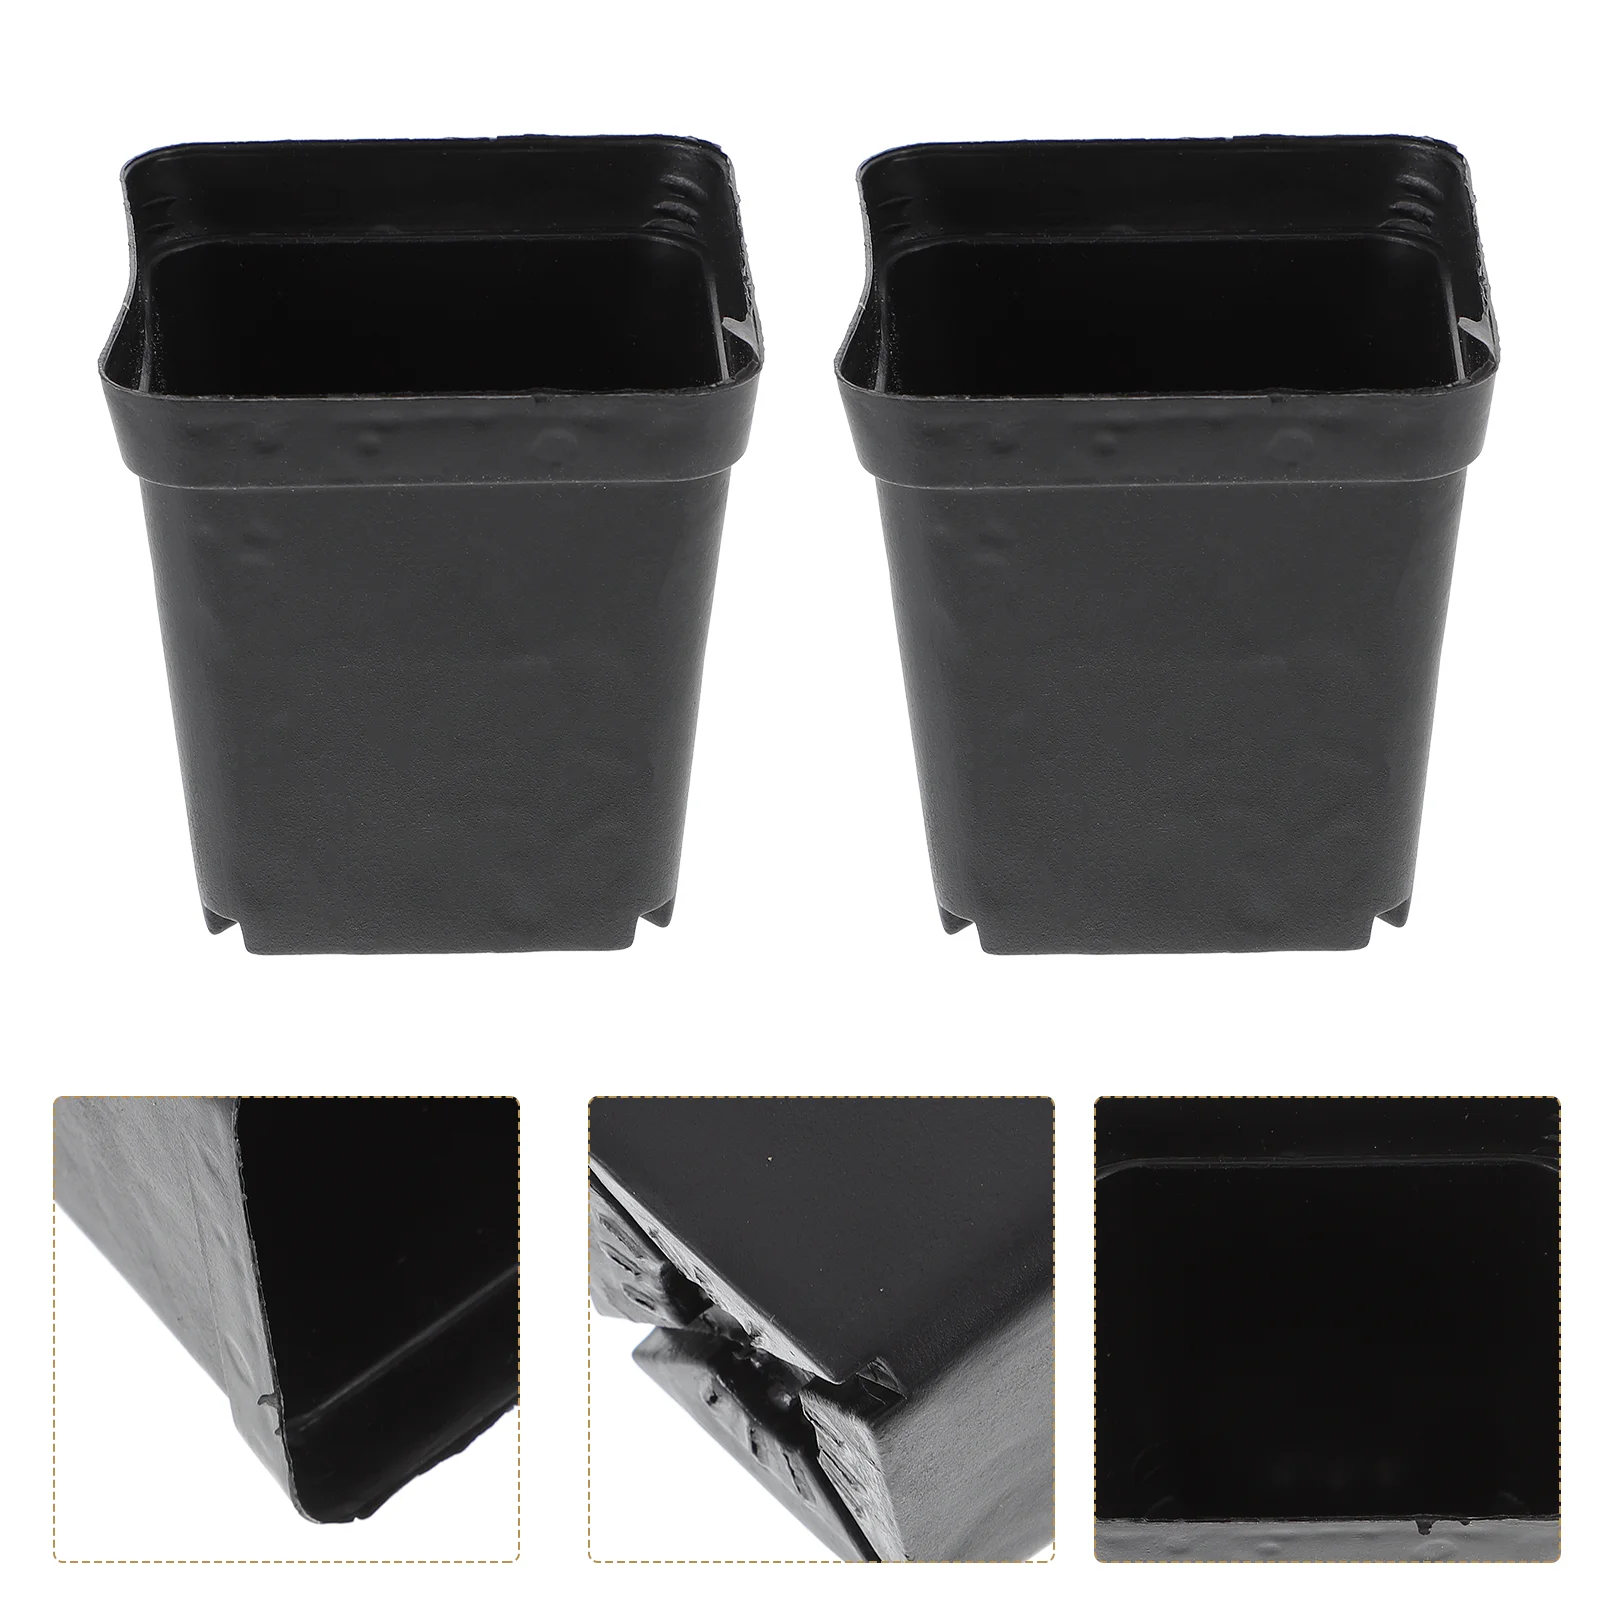 

50pcs Black Pots with Drainage Holes Nursery Pots Flower Pots Vegetables Container for Indoor Outdoor Plants Transplanting